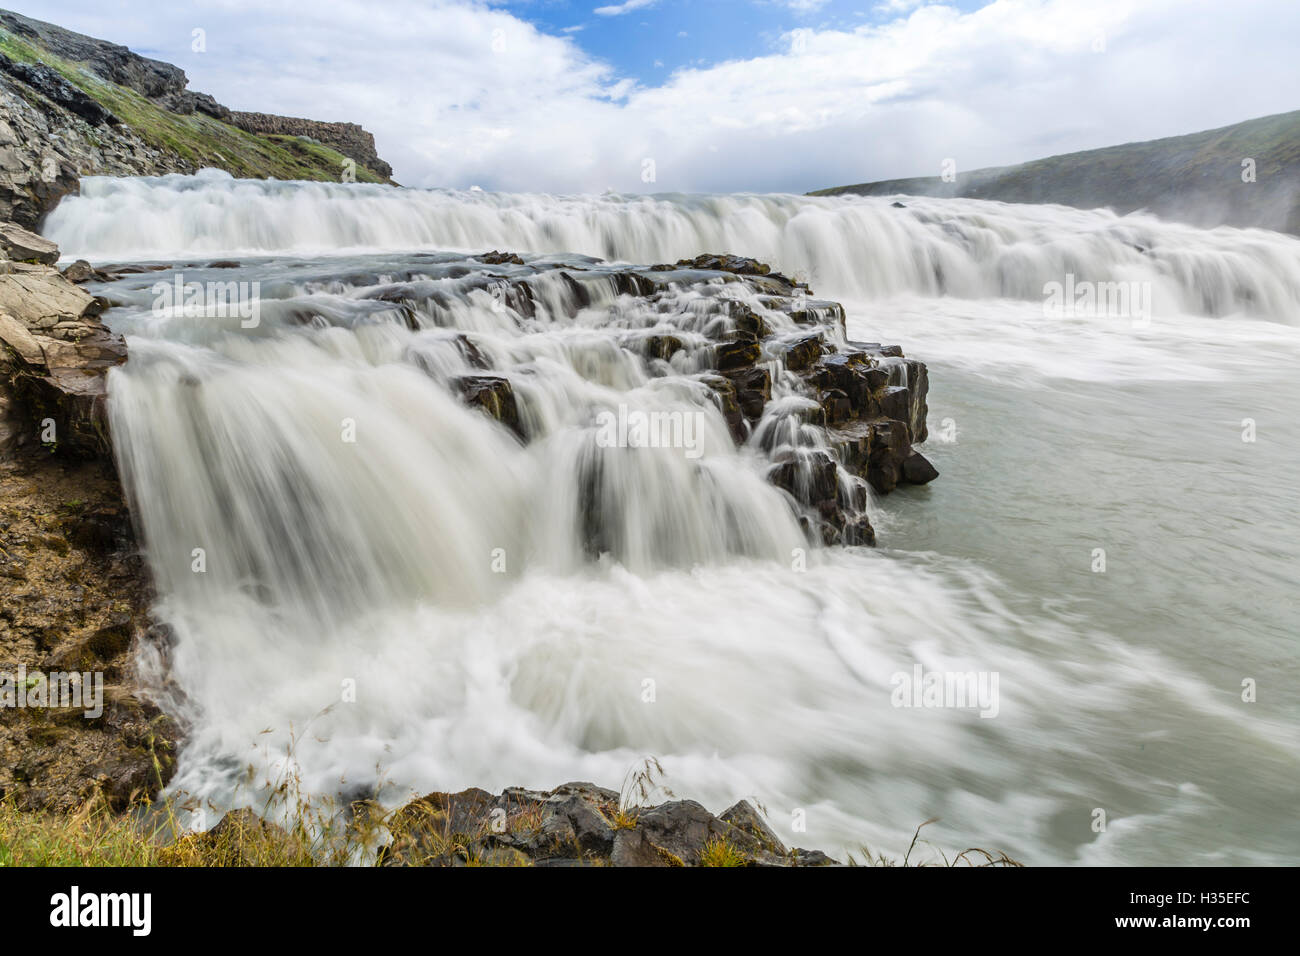 Gullfoss (Golden Falls), a waterfall located in the canyon of the Hvita River in southwest Iceland, Polar Regions Stock Photo